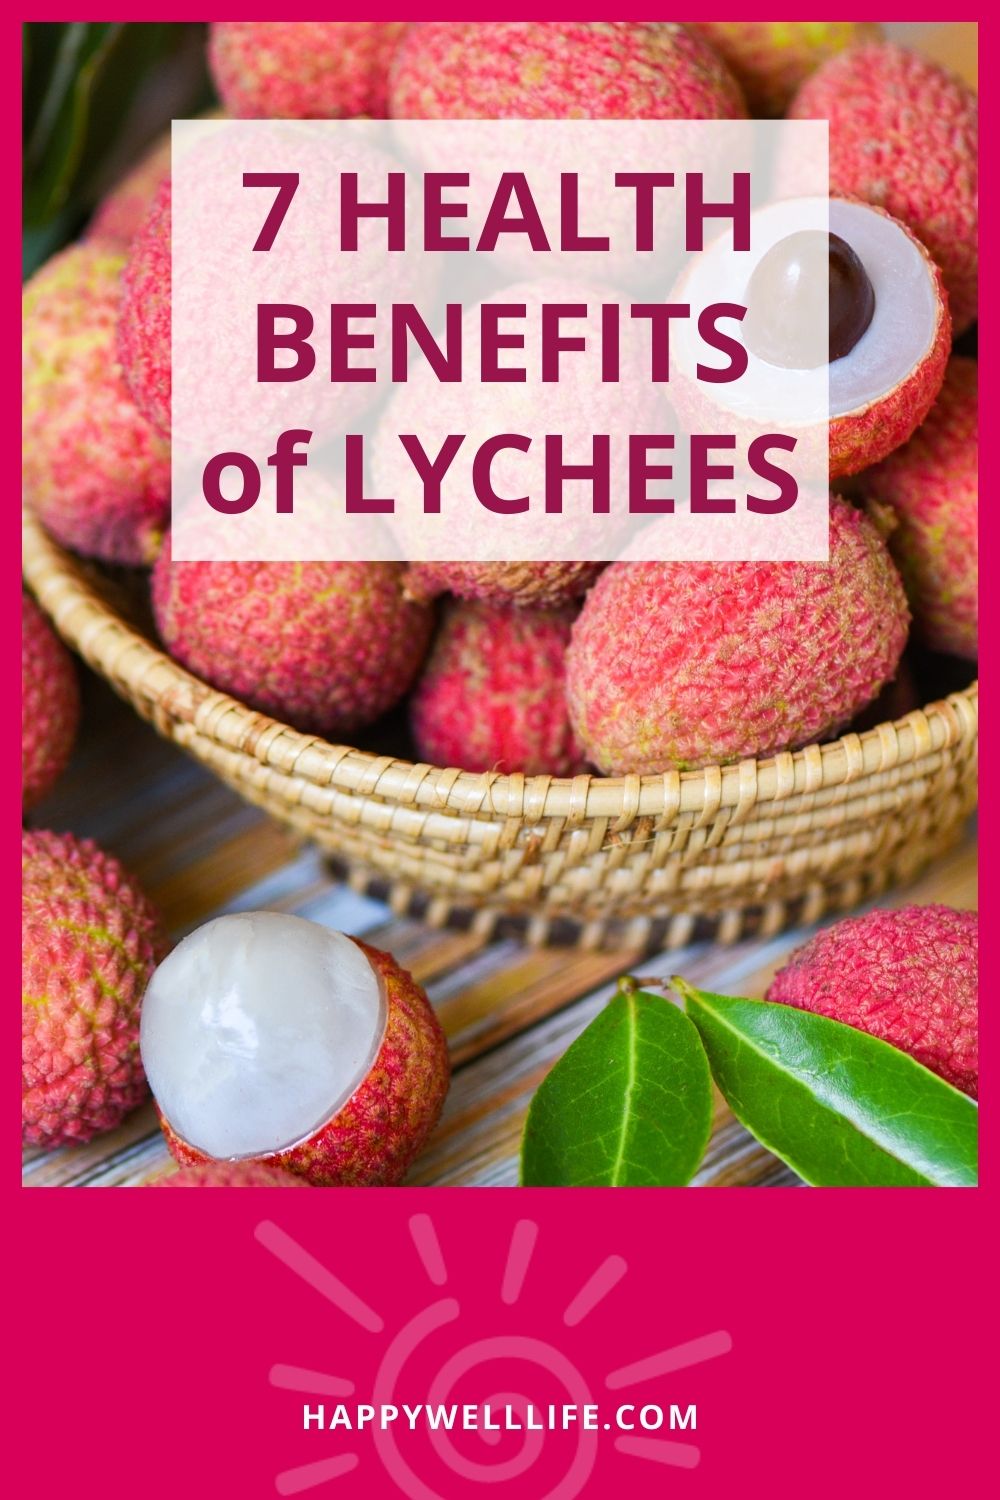 7 Health Benefits of Lychees graphic